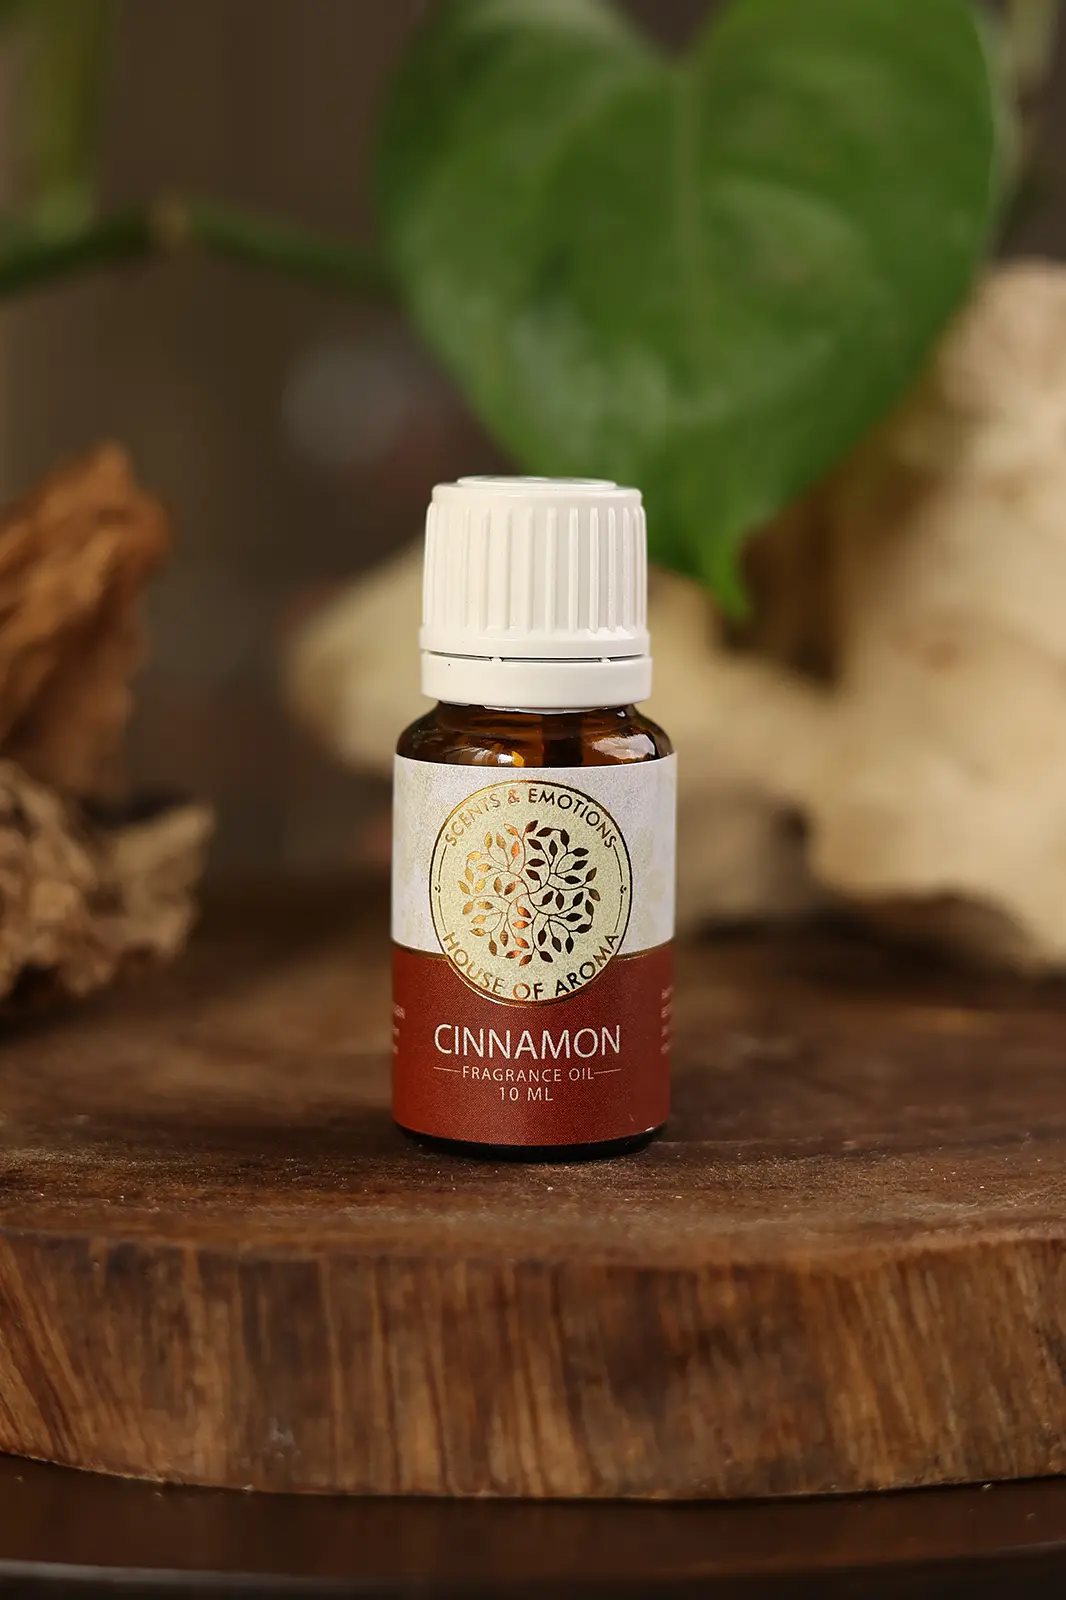 Fragrance Oil, Aroma oil, Synthetic oils, Fragrance oil for candles, oil for diffusers, Aromatic oil, Candle oil, Aromatherapy oil, oil manufacturers, House of Aroma, Cinnamon Fragrance Oil, cinnamon fragrance brand, cinnamon spice fragrance oil, cinnamon scented oil, cinnamon clove oil, cinnamon oil, spicy flavour aroma oil, cinnamon scented oil